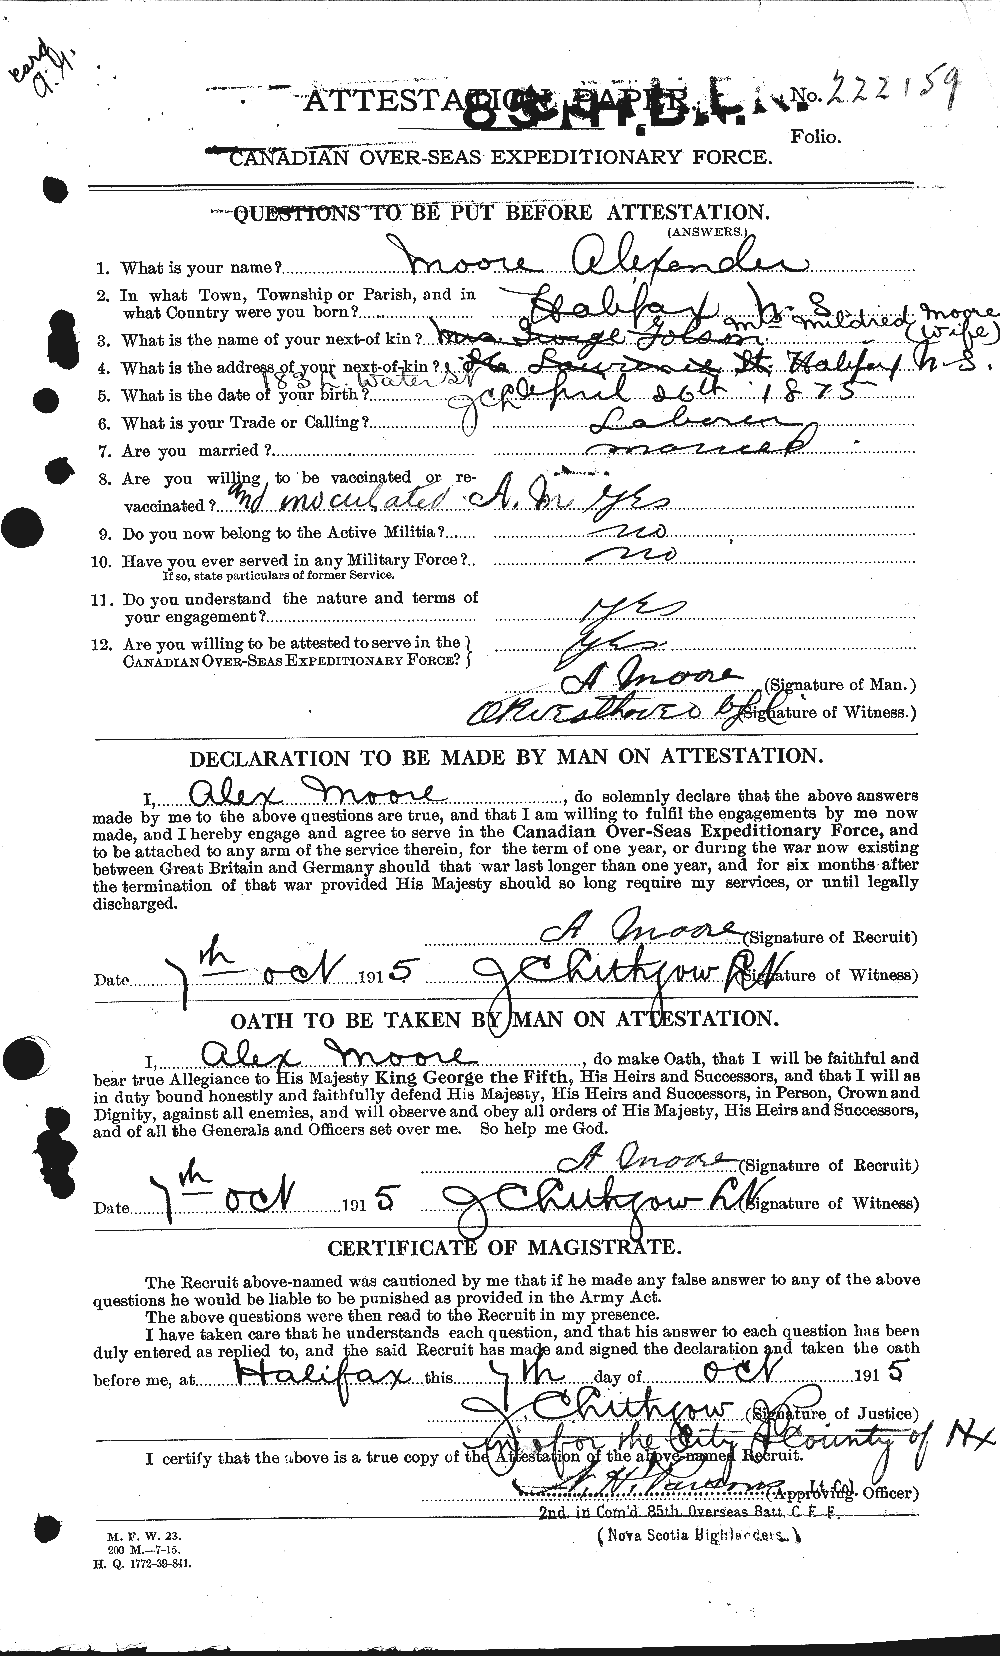 Personnel Records of the First World War - CEF 506359a